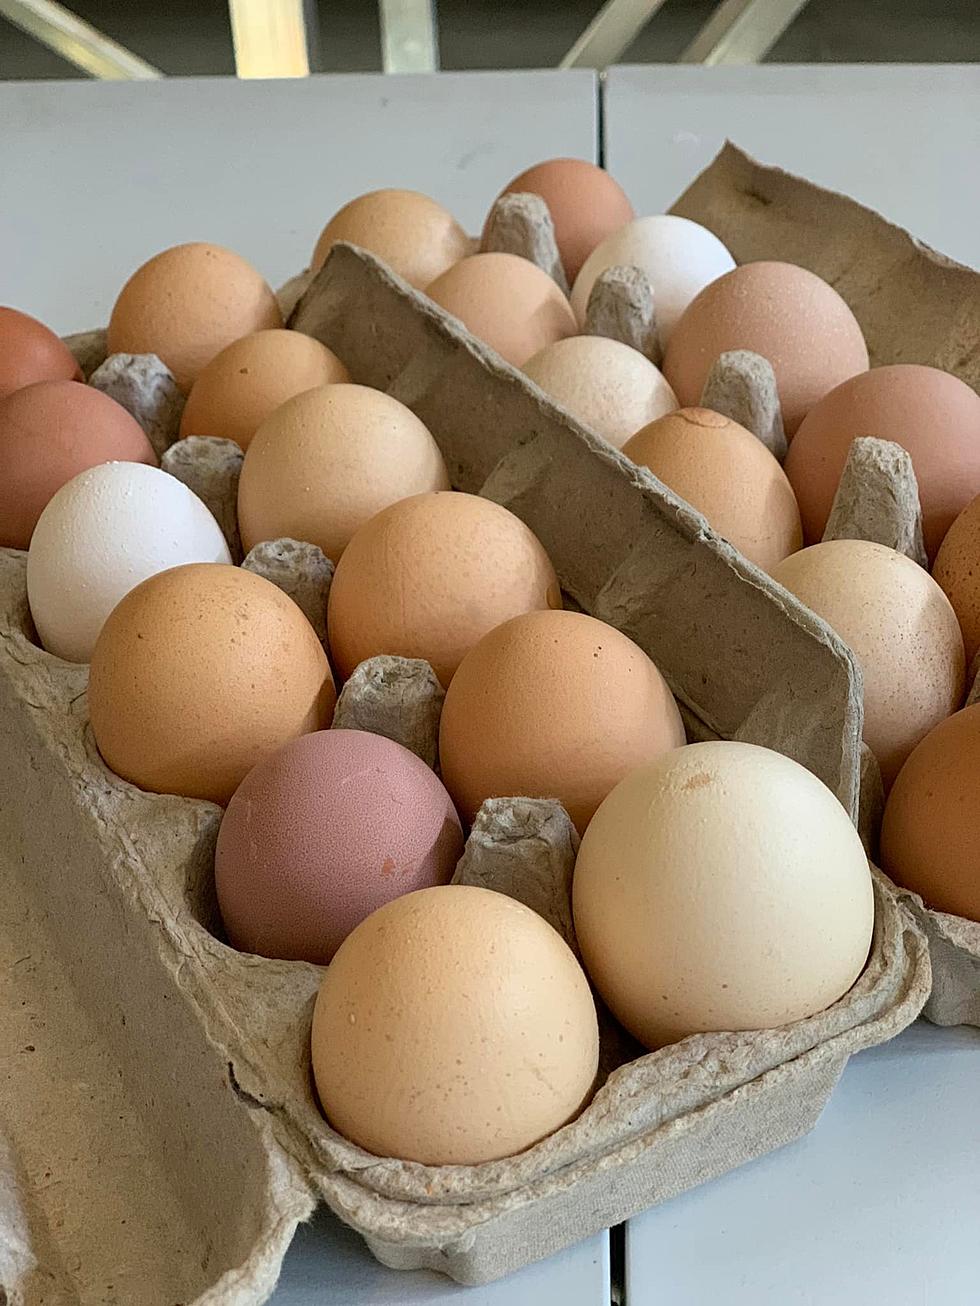 One Illinois Family Is Putting All Their Eggs In St. Jude&#8217;s Basket